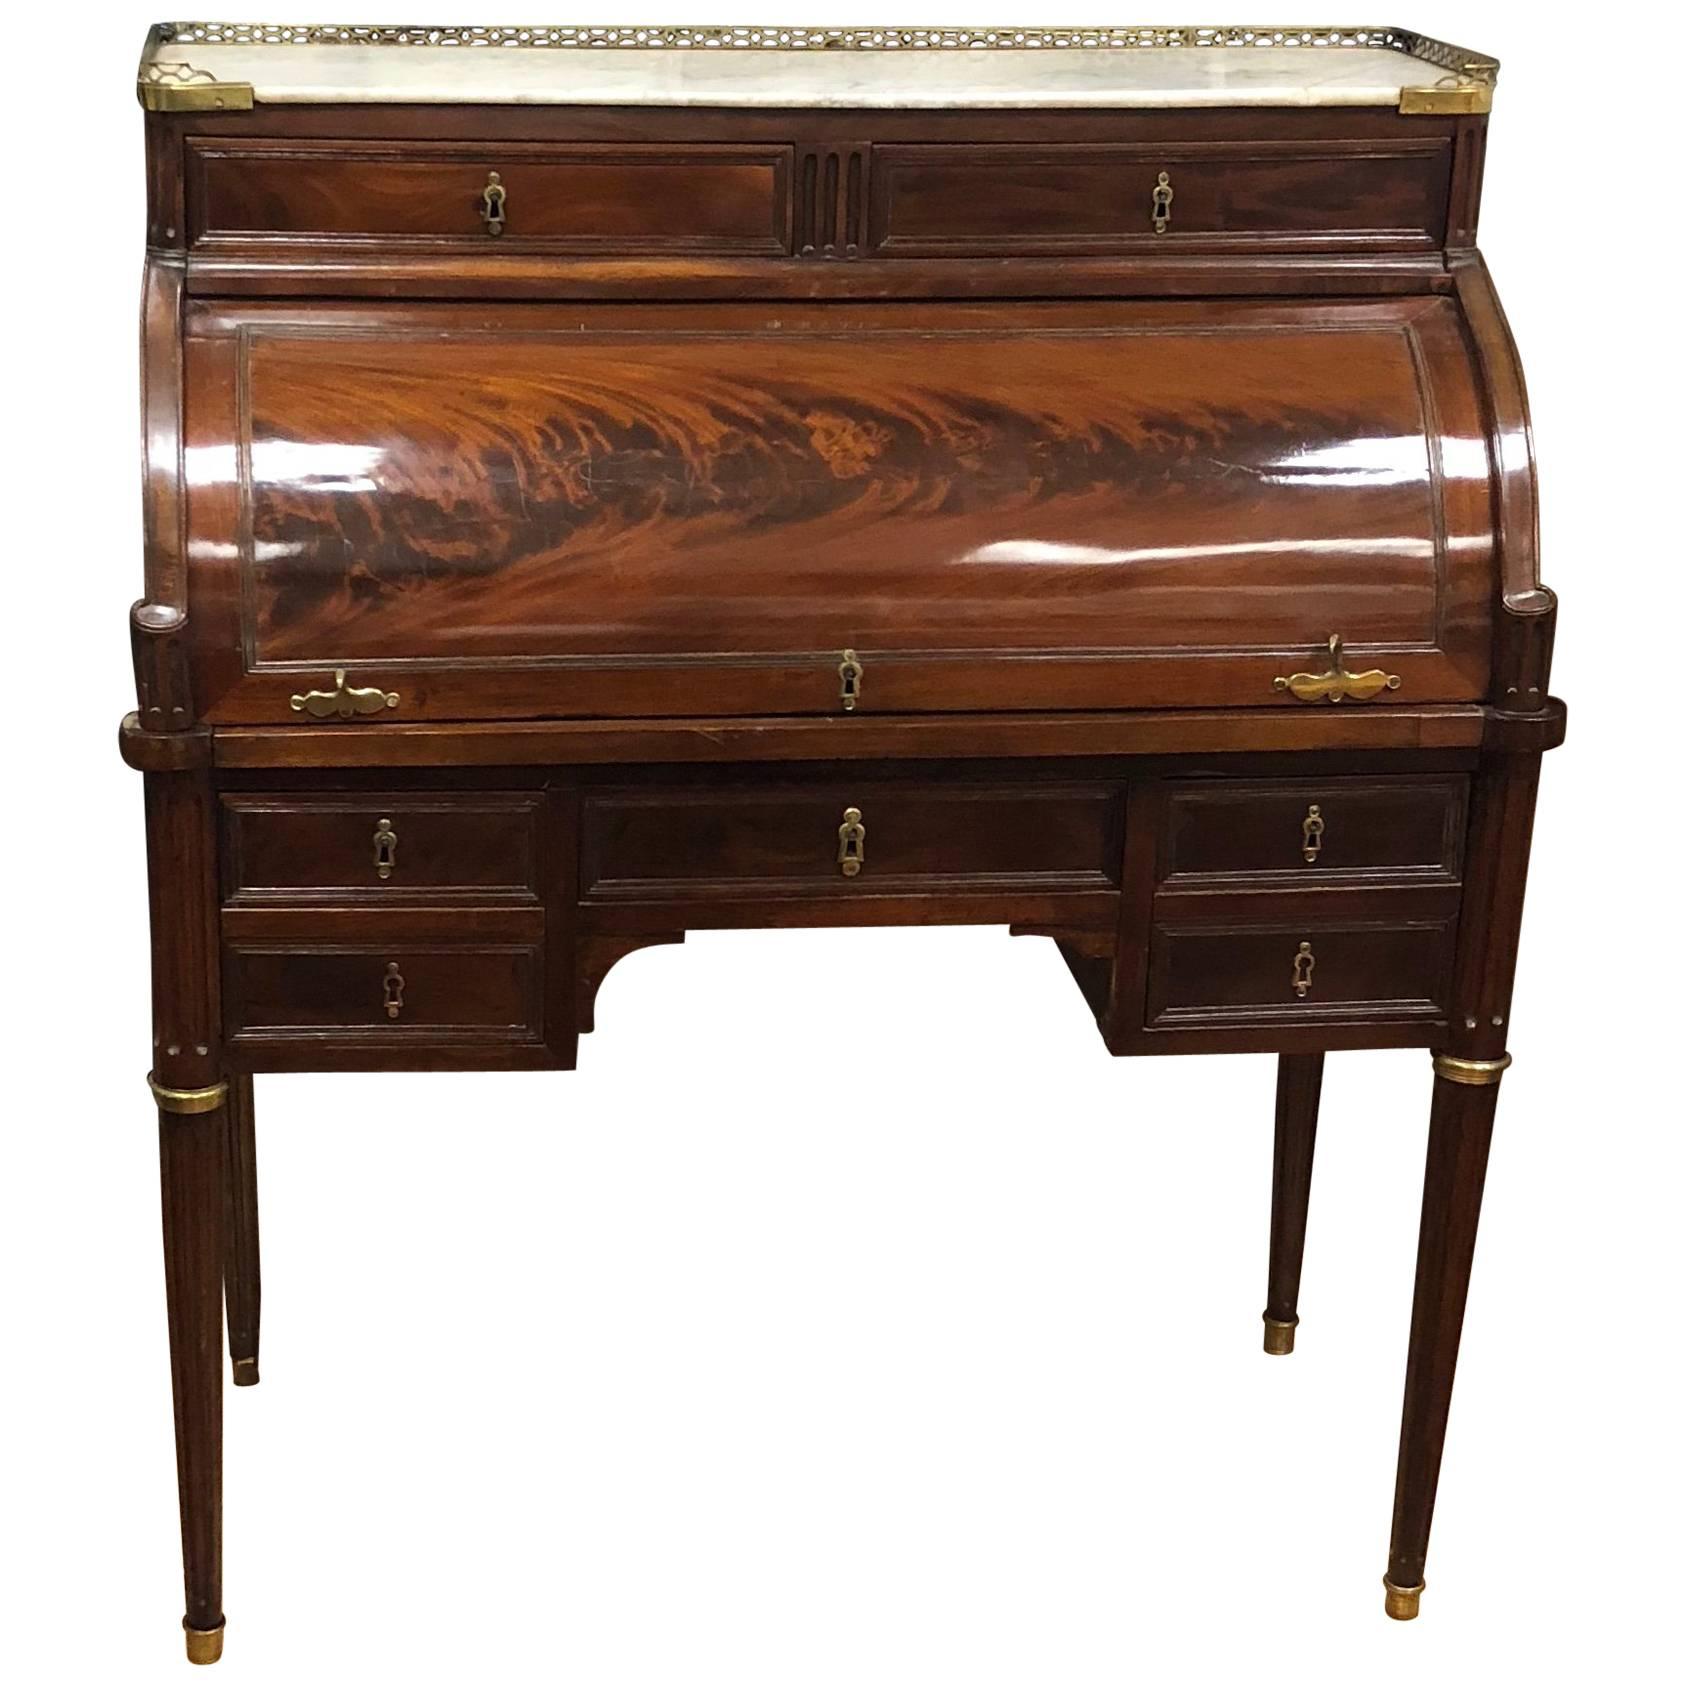 Louis XVI Mahogany and Brass Mounted Bureau a Cylindre, Late 18th Century For Sale